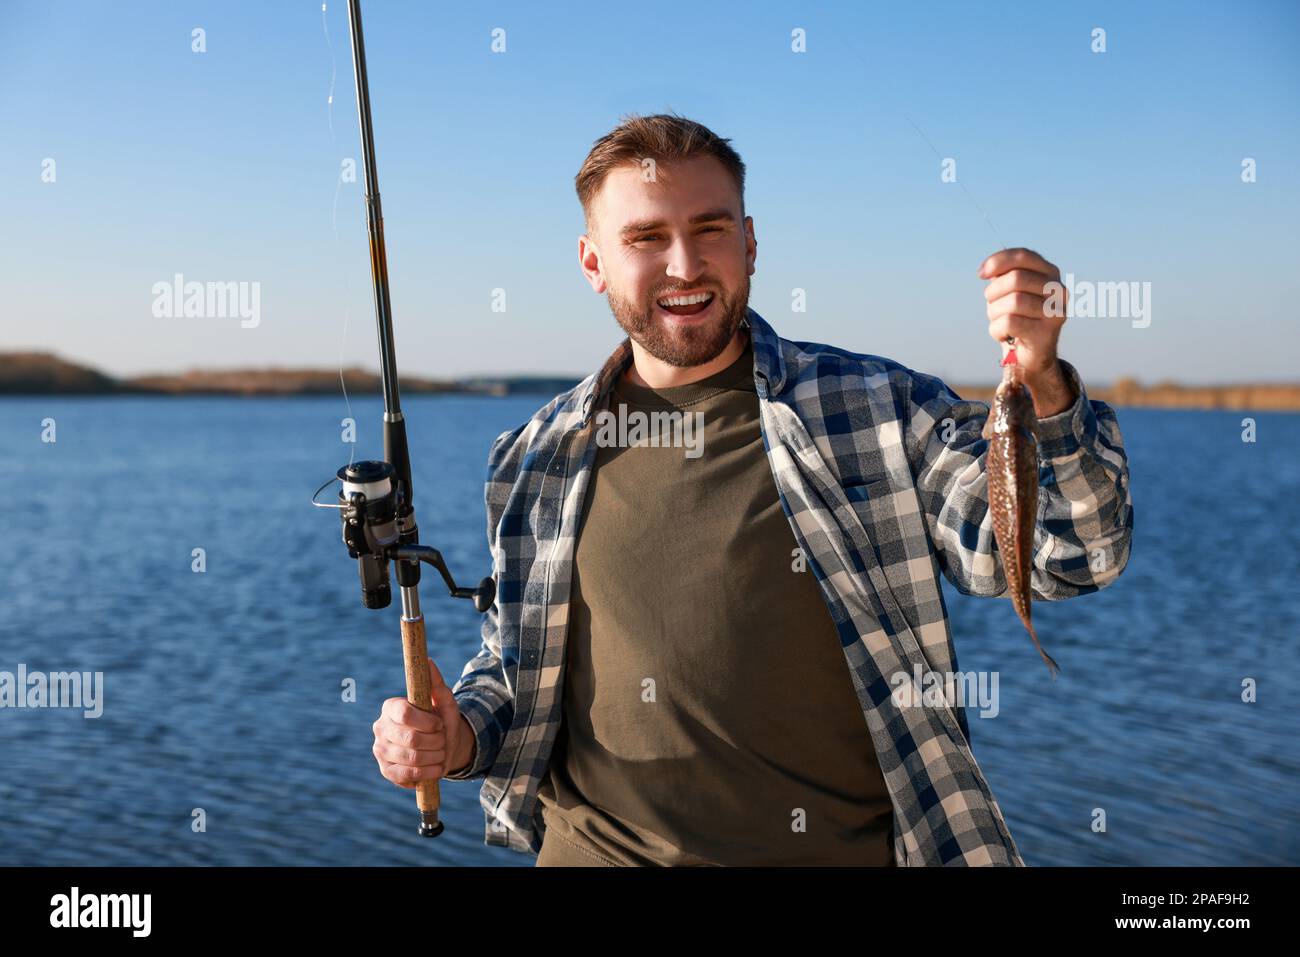 Fisherman holding fishing rod and catch at riverside Stock Photo